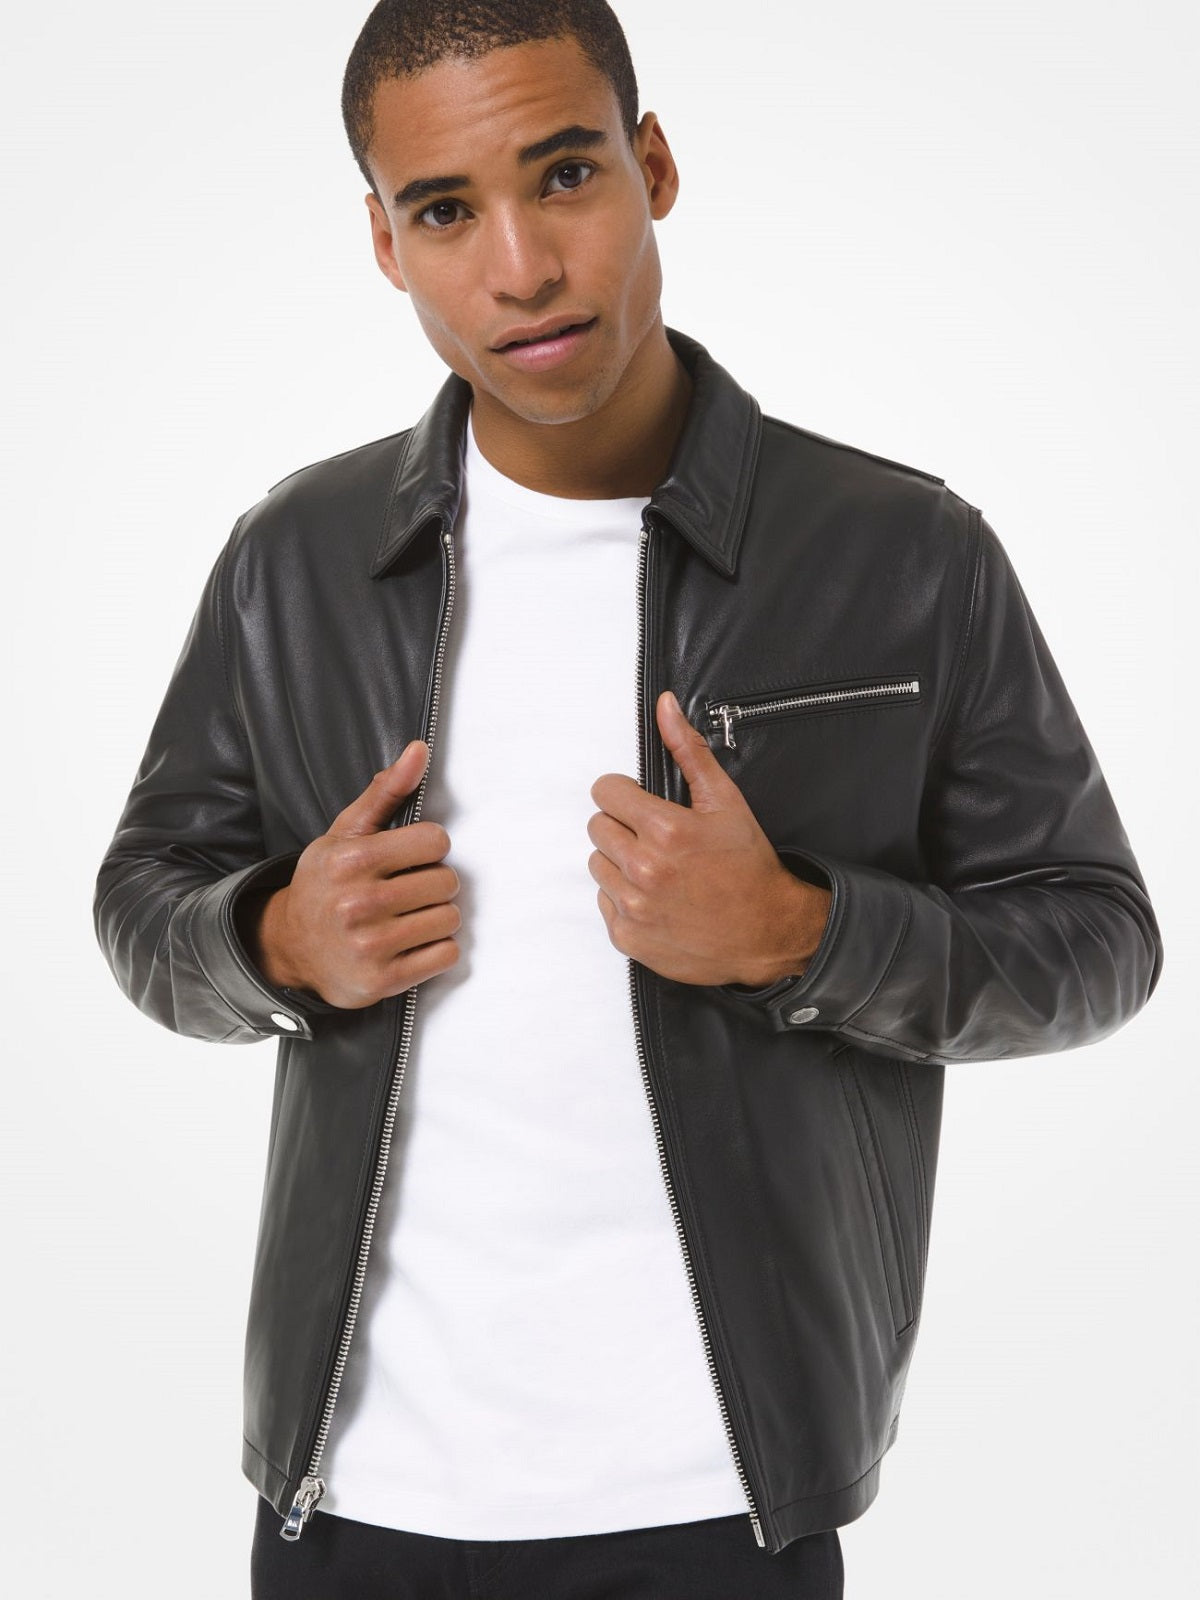 Coach Leather Jacket for Men